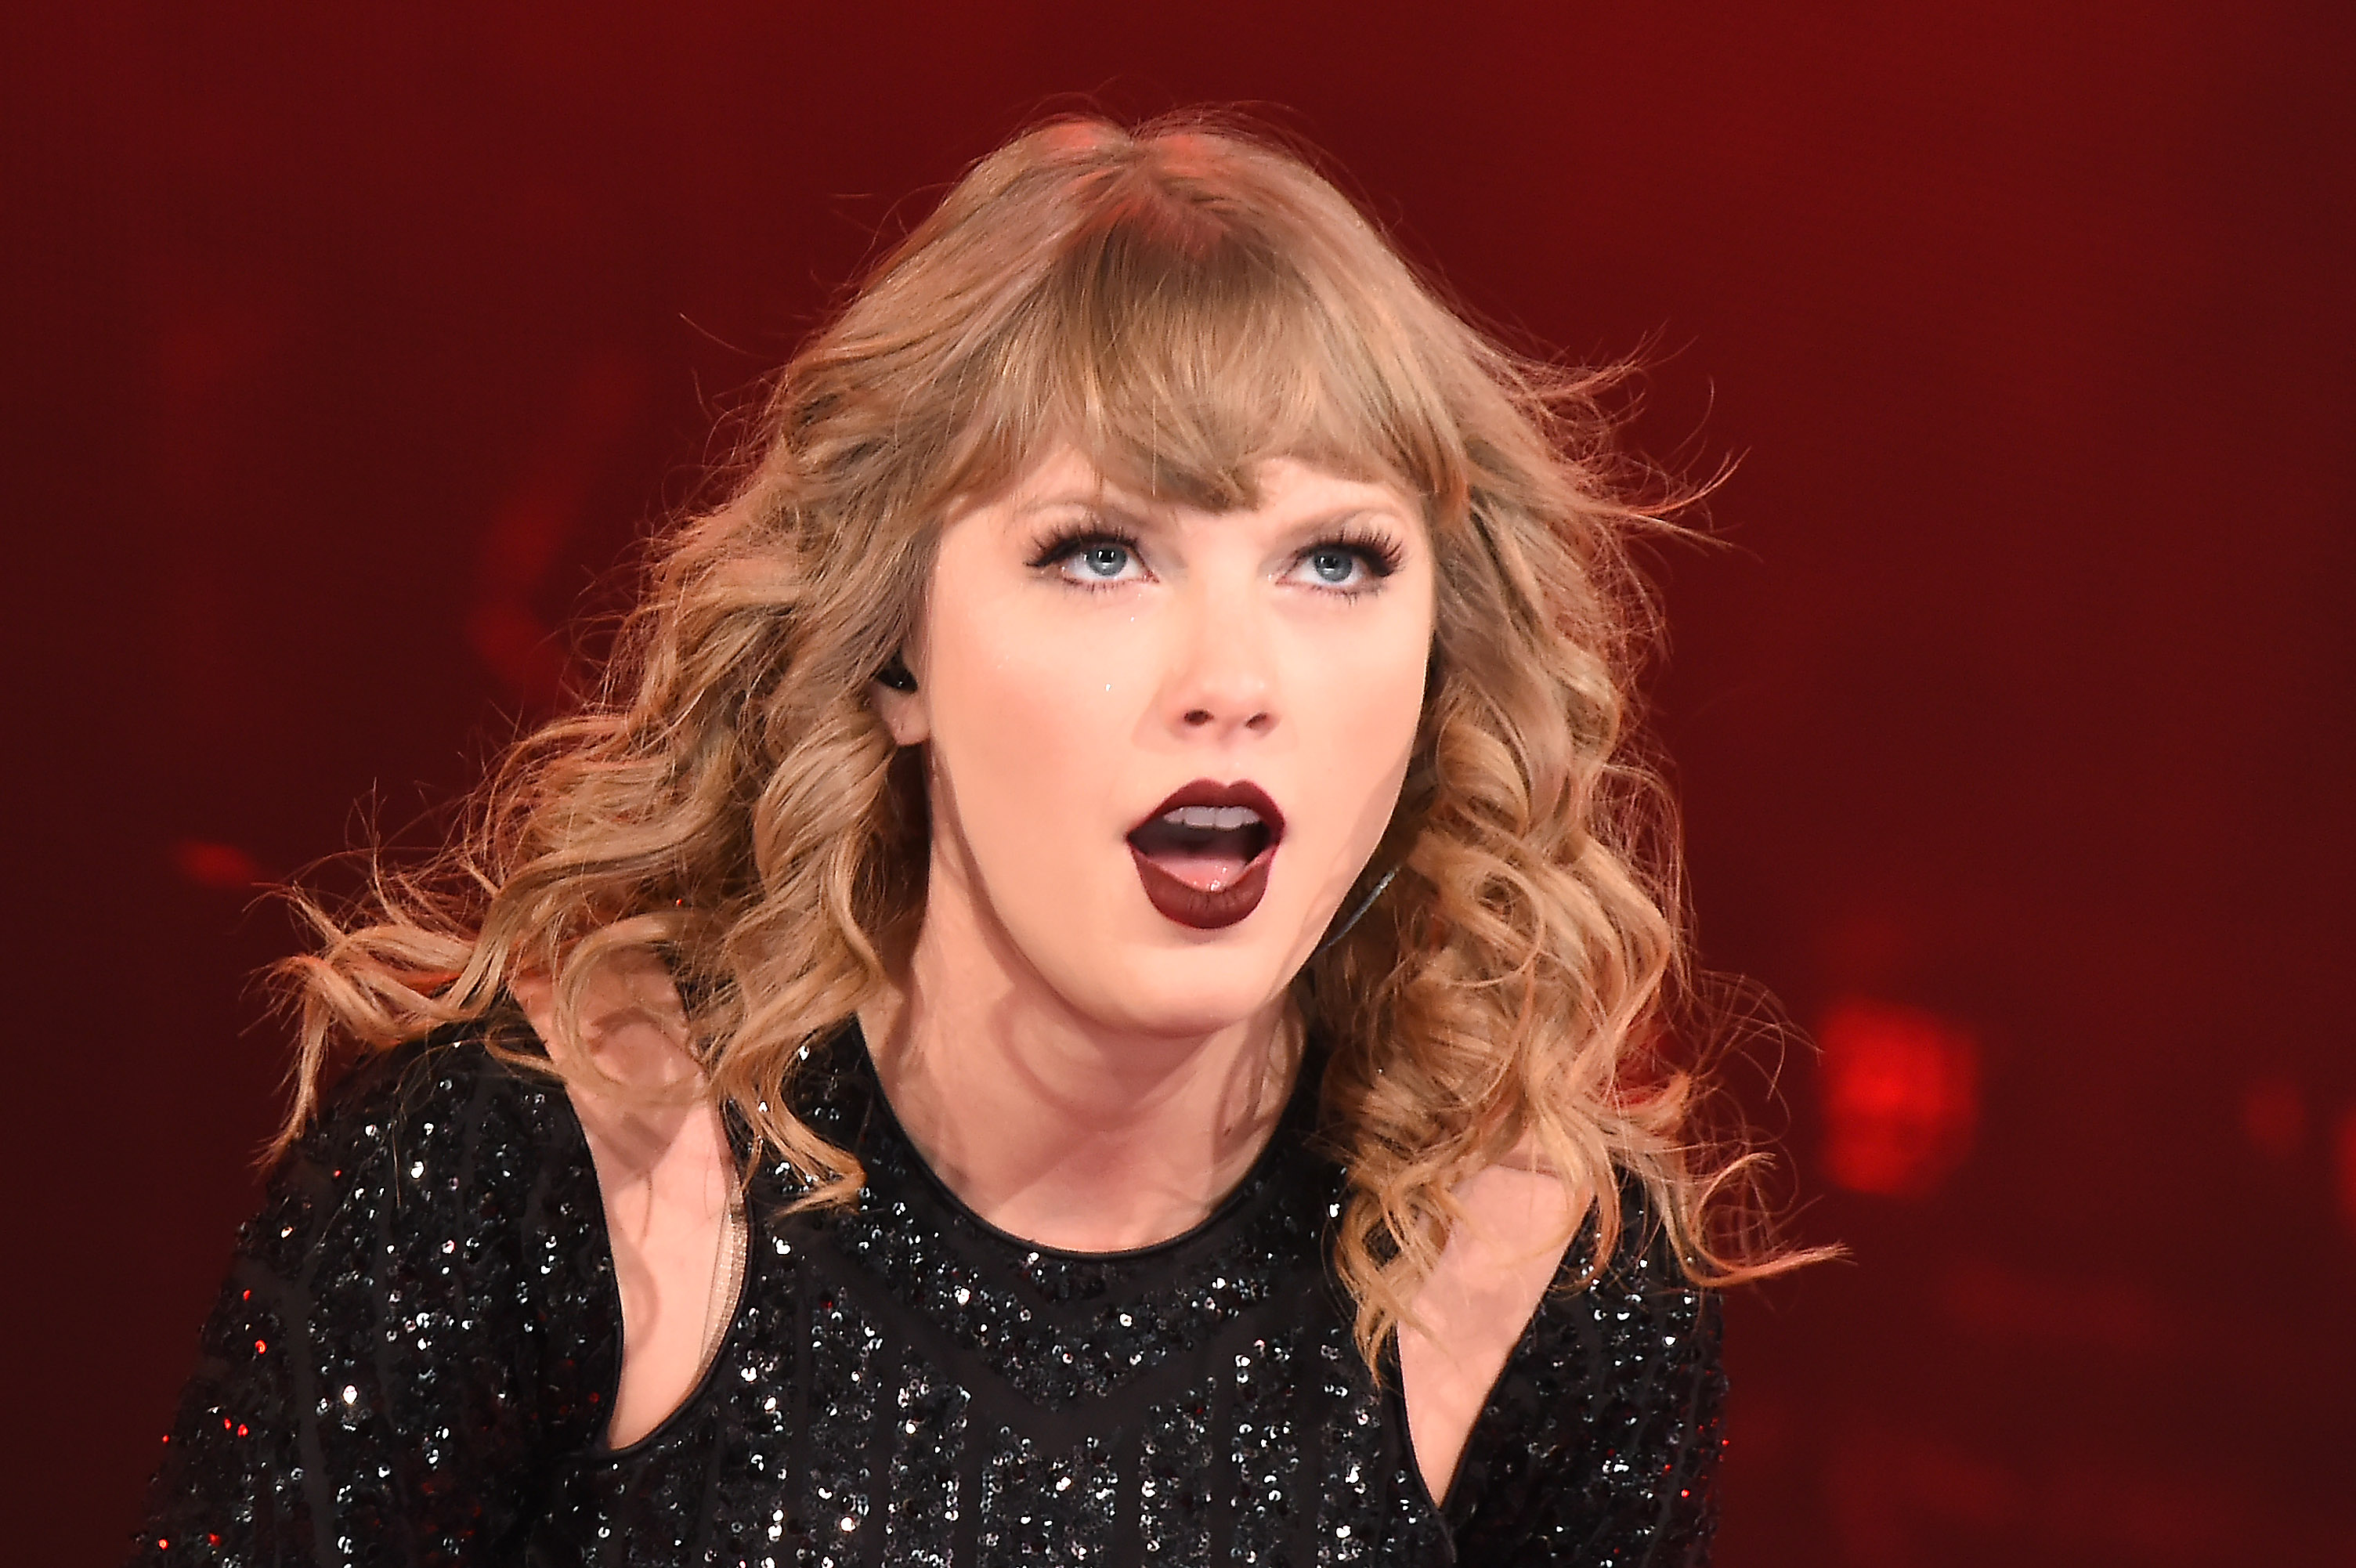 How to hide songs on Spotify, including Taylor Swift's old 'Fearless' albums